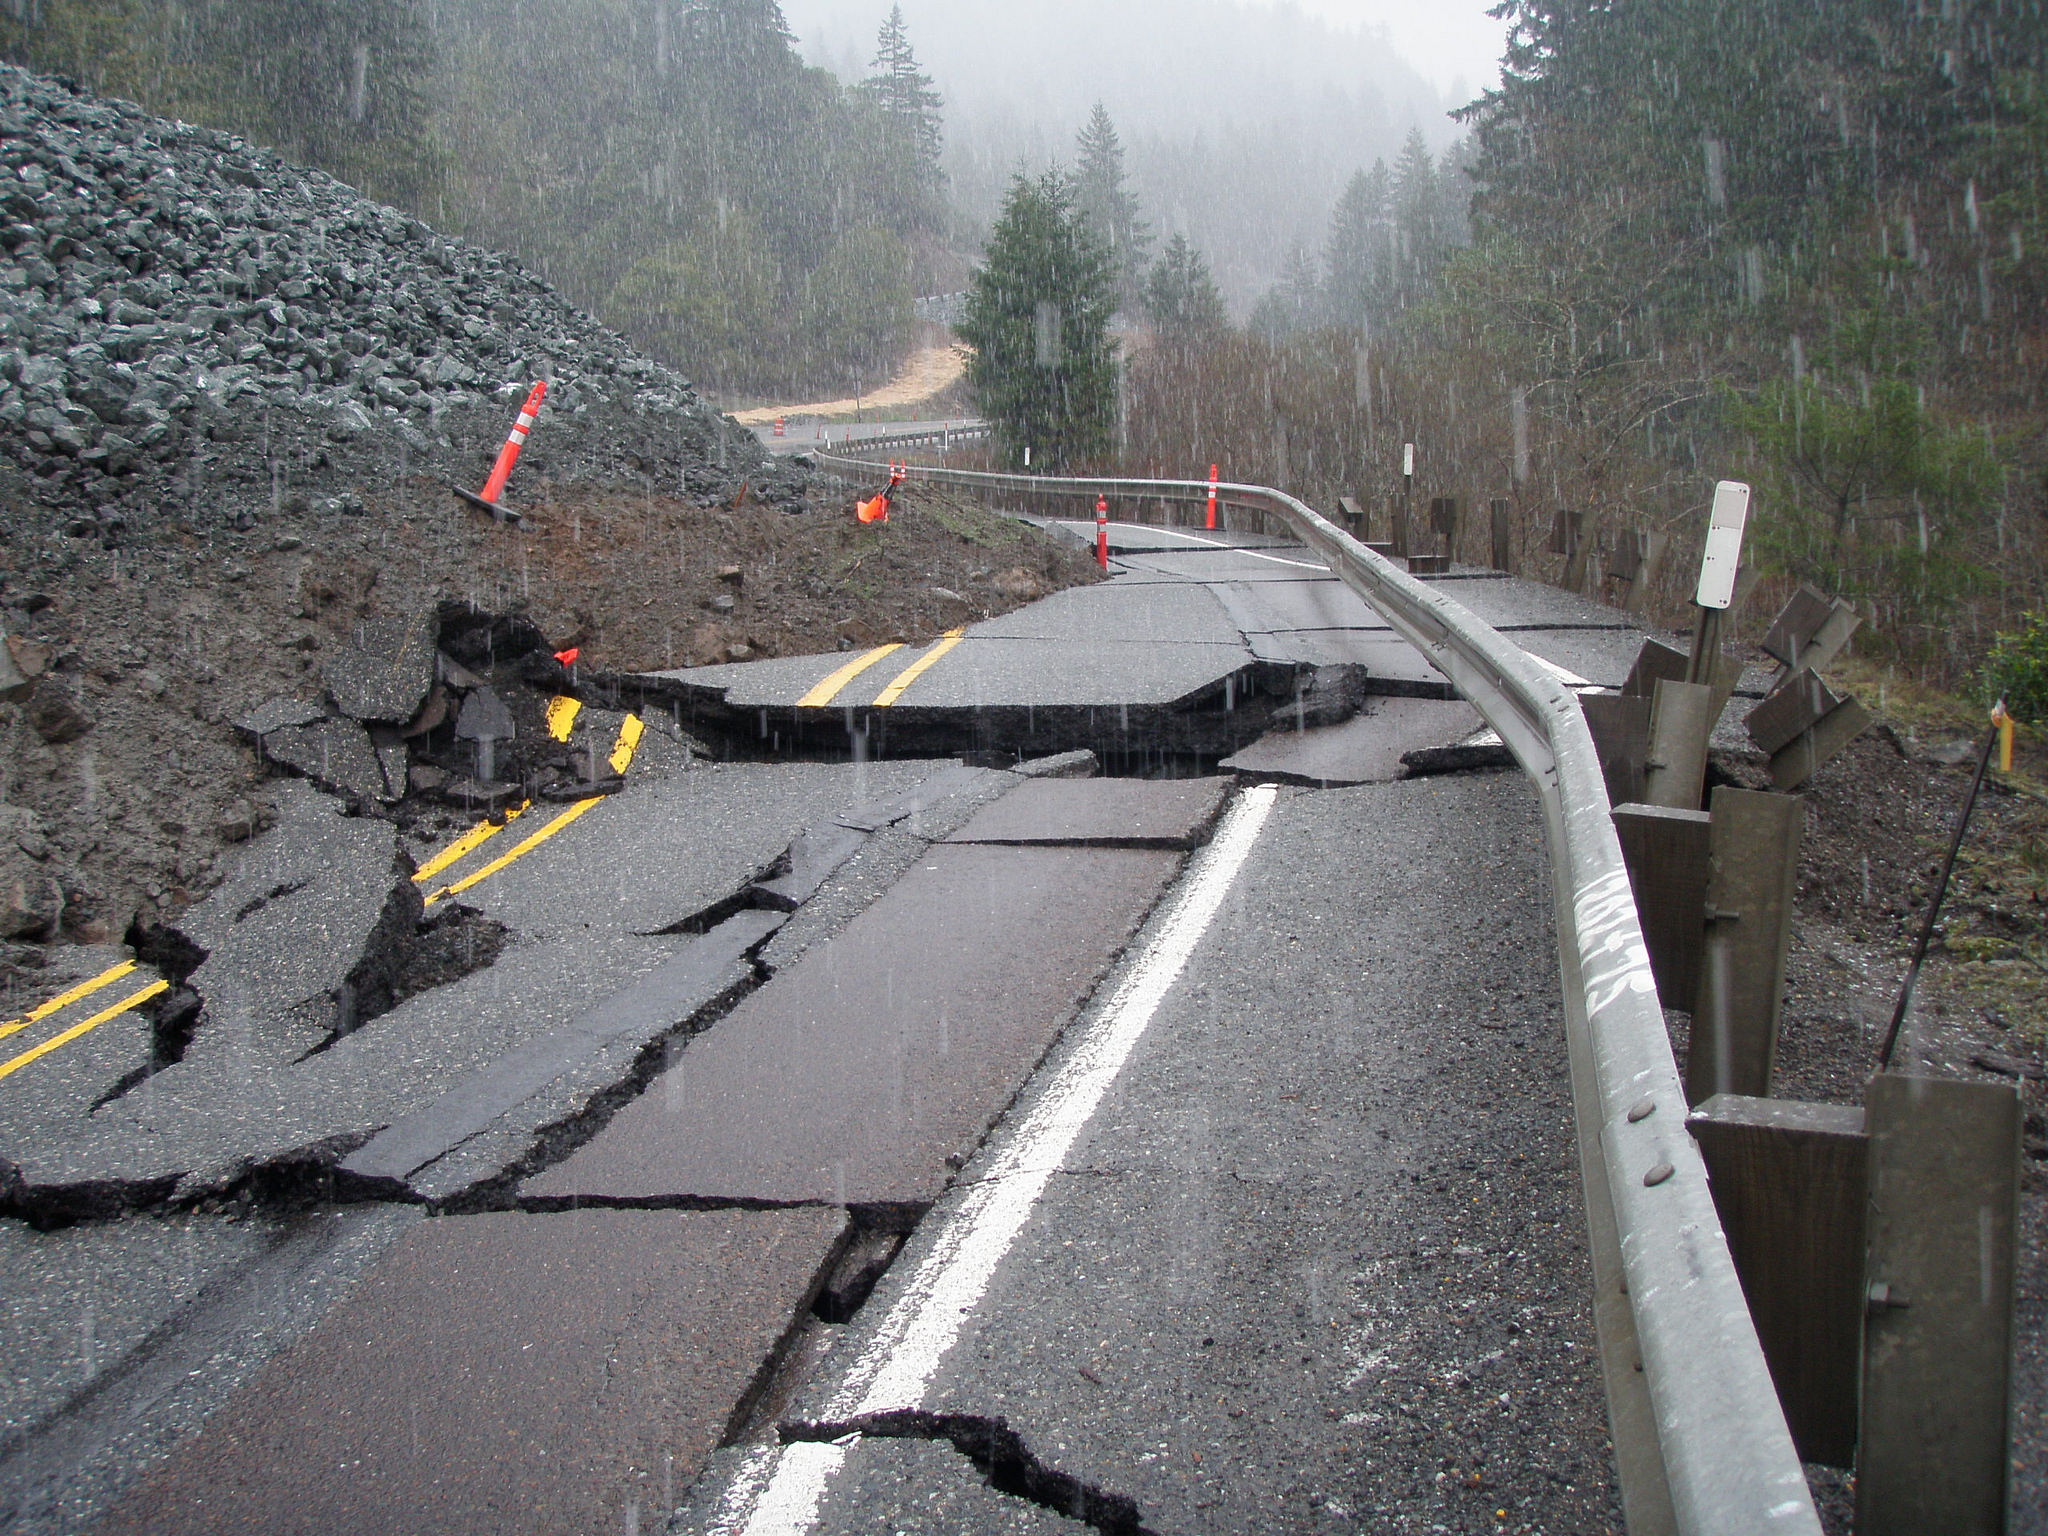 kgw.com | Landslide repairs on Highway 42 could cost $5 million